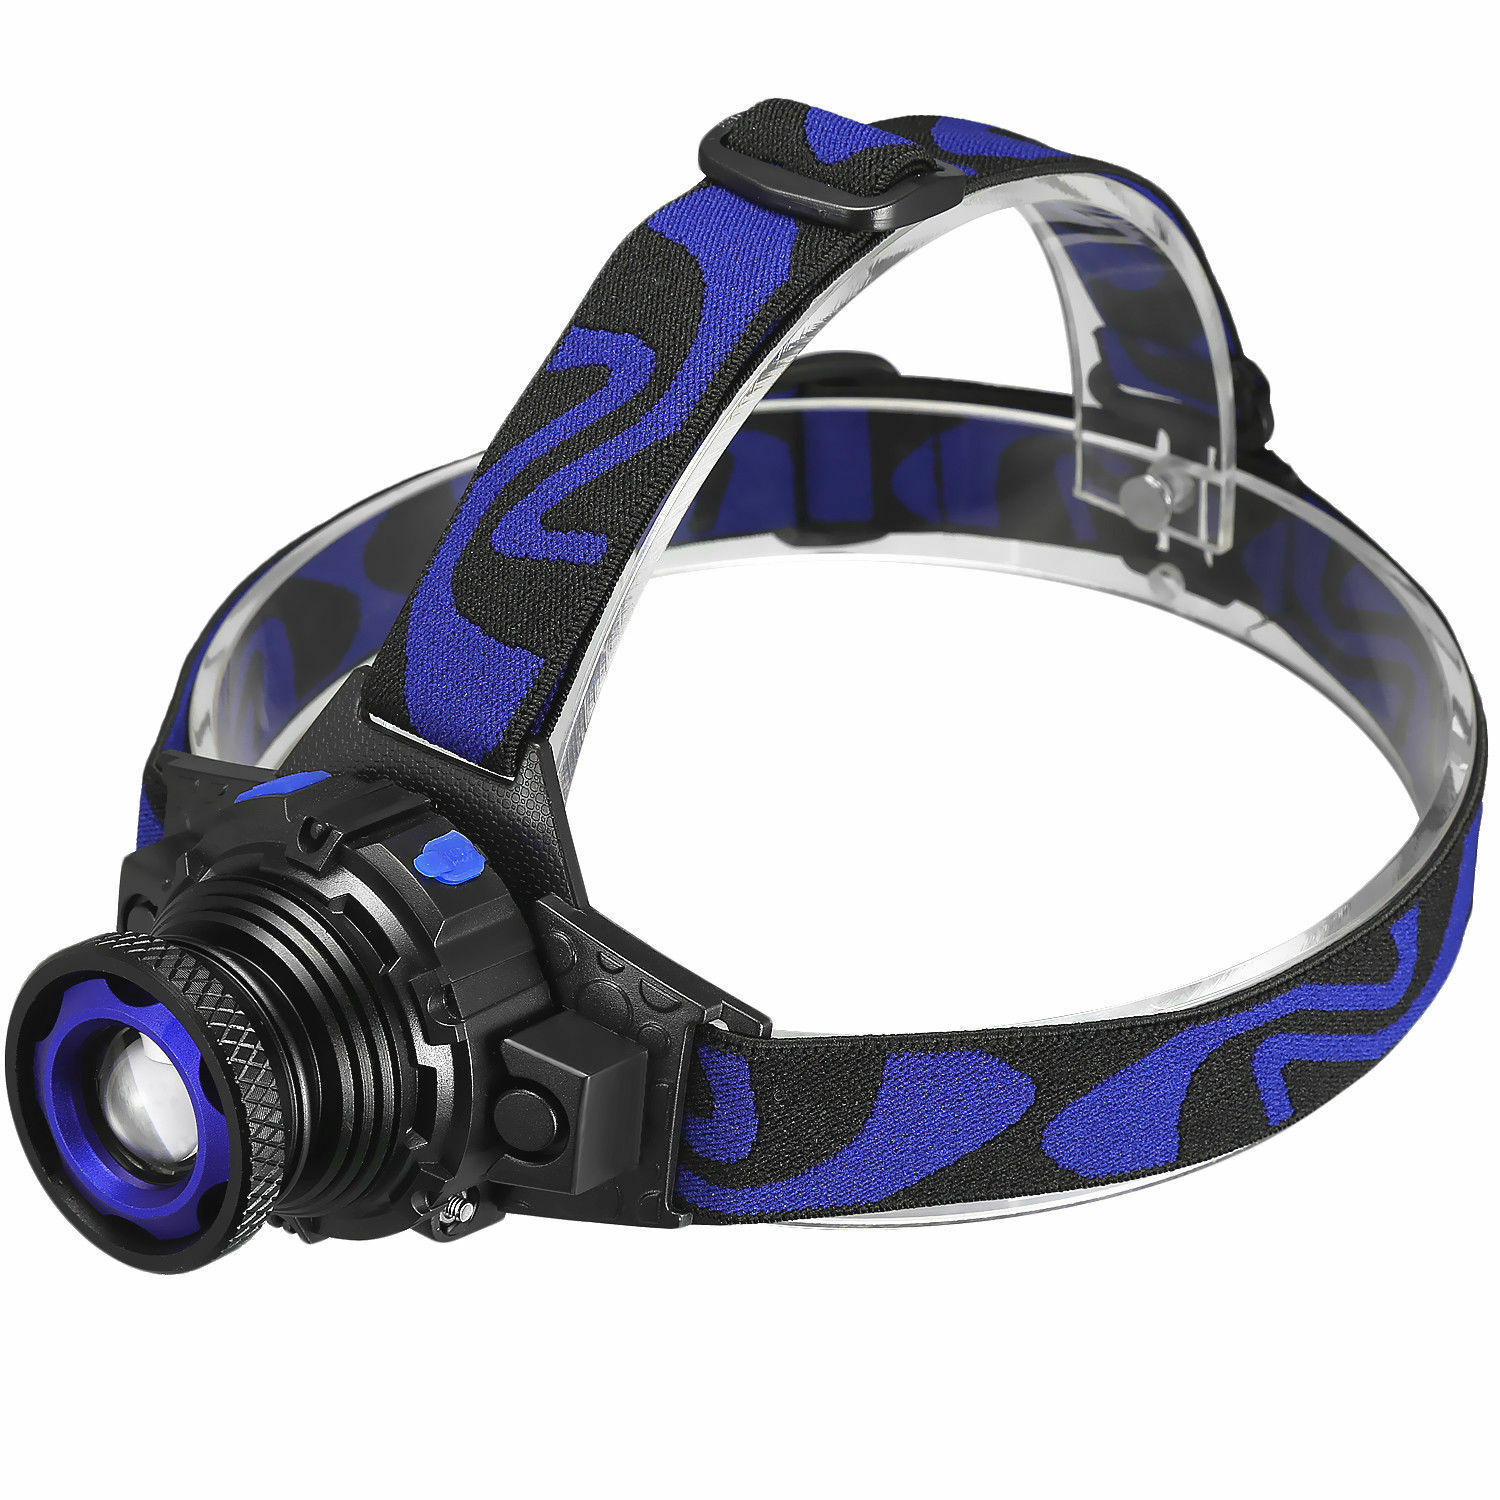 36000lm Zoomable Headlamp T6 Led Headlight Lamp Flashlight+charger+18650battery